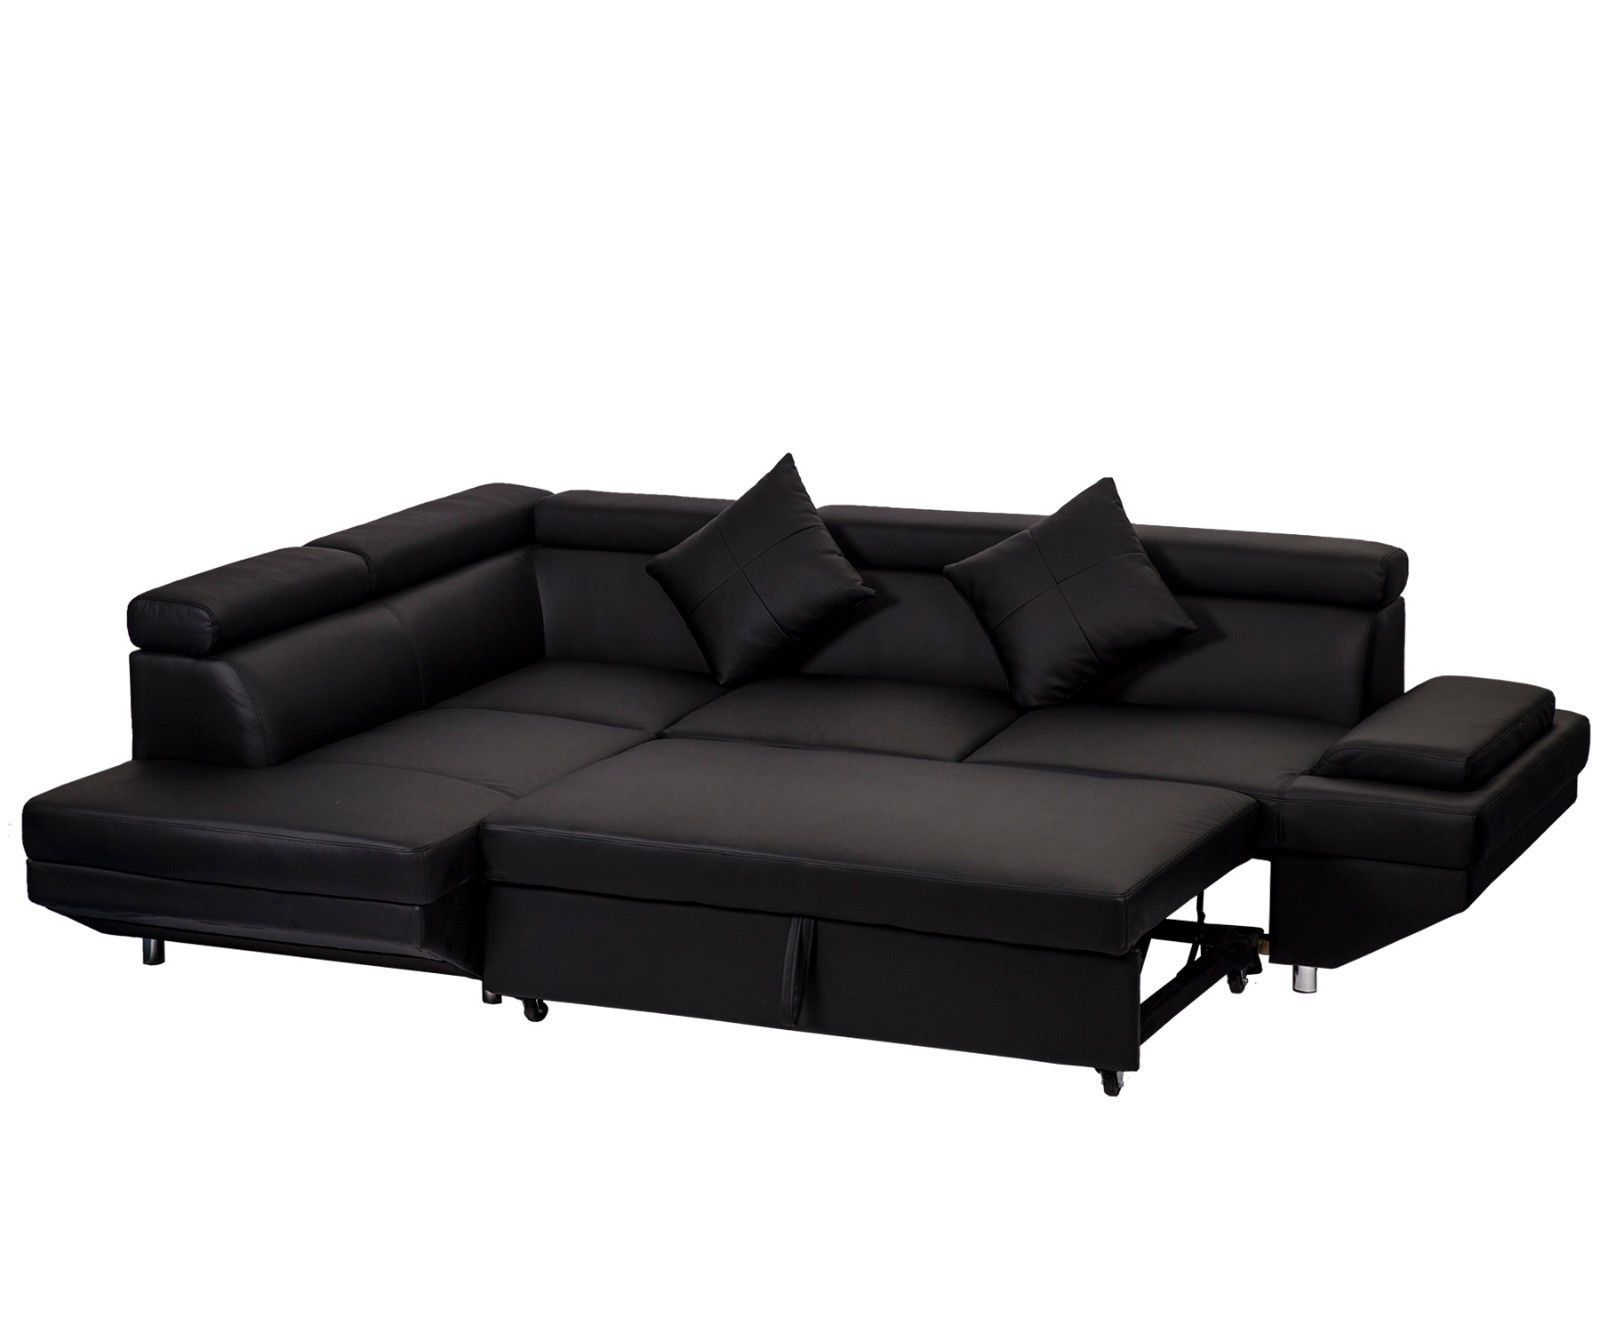 Modern sofa beds contemporary sectional modern sofa bed - black with functional armrest /  back UBKHLEP